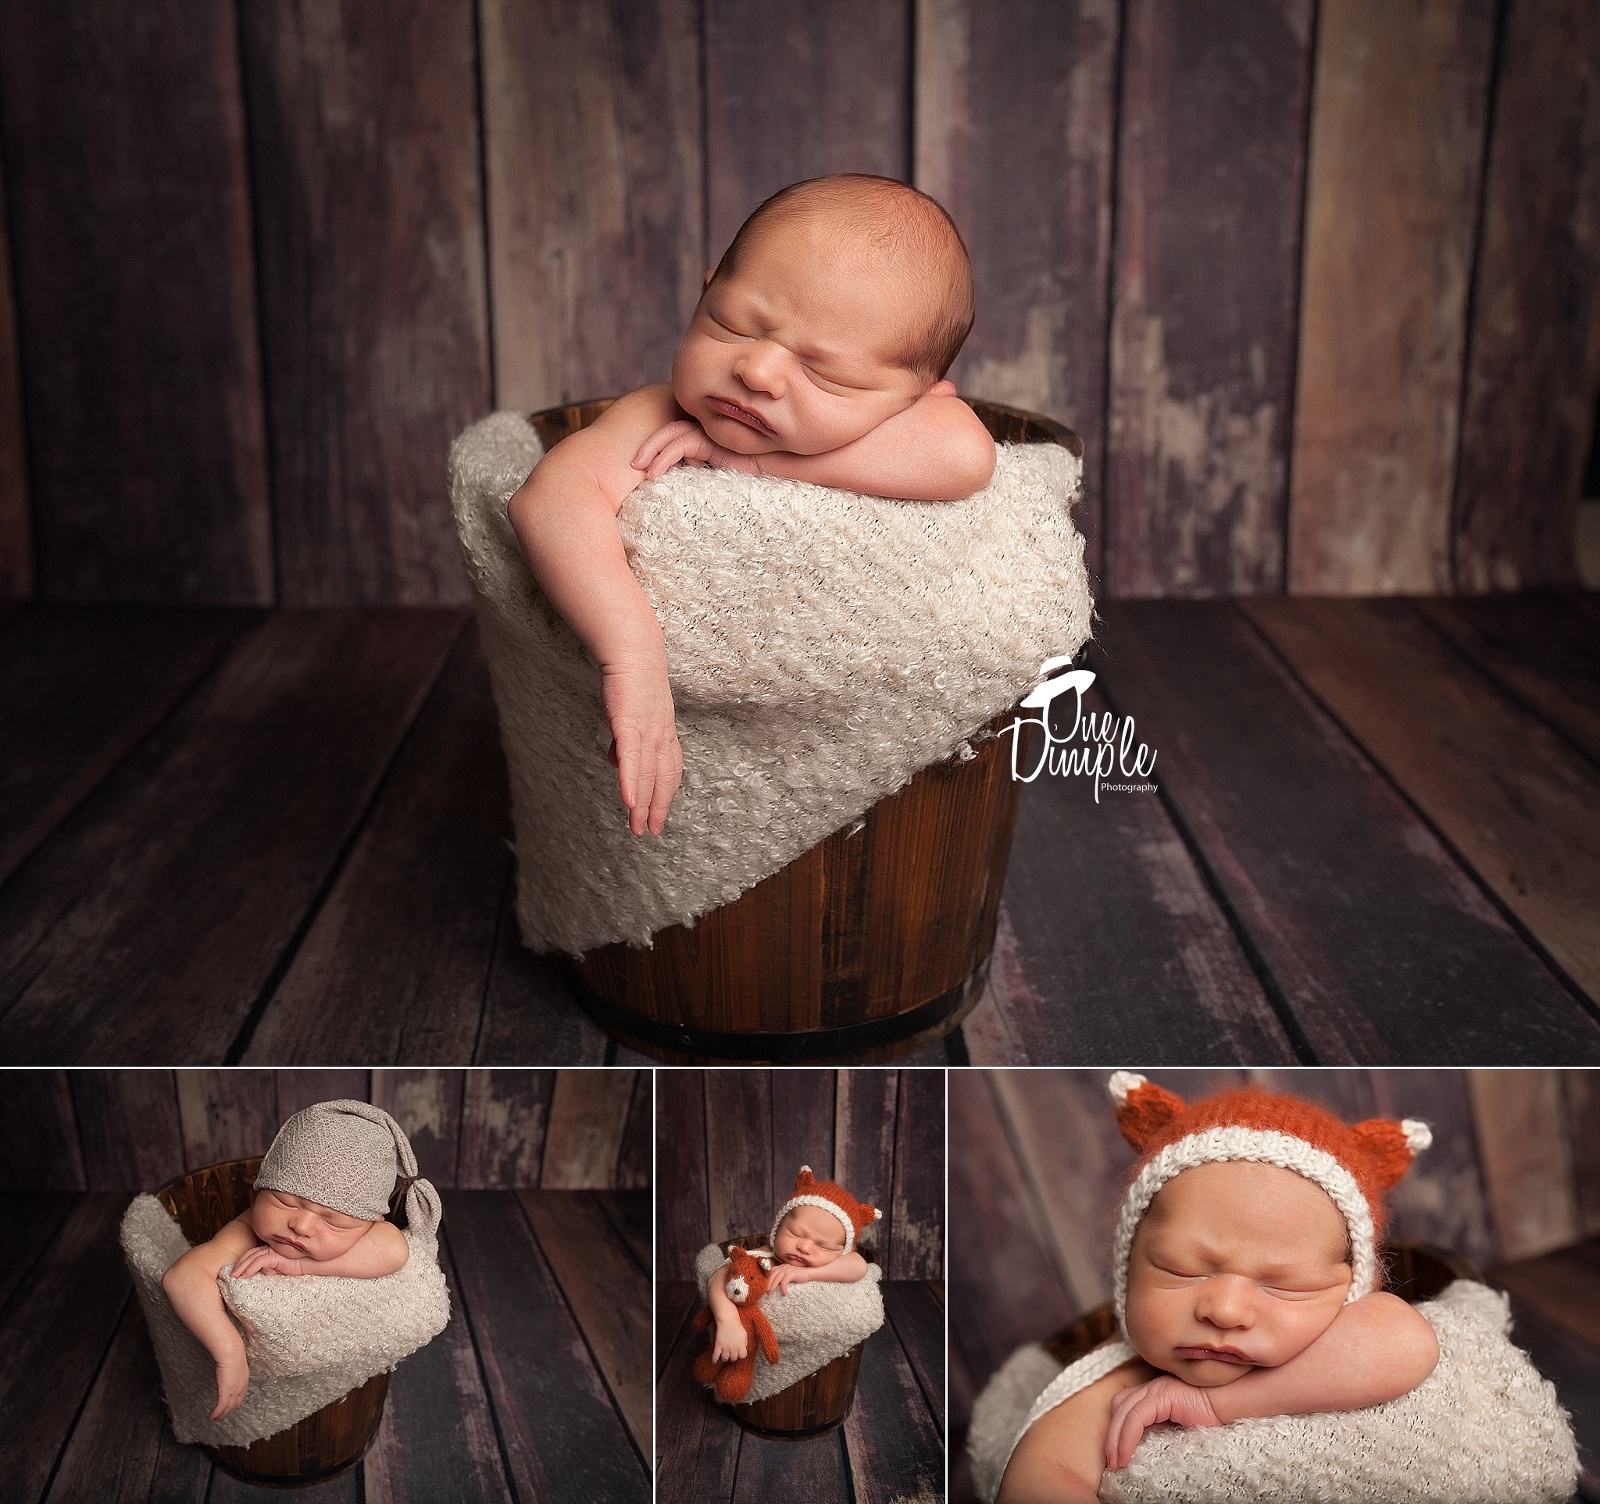 Newborn in fox outfit one wood floors